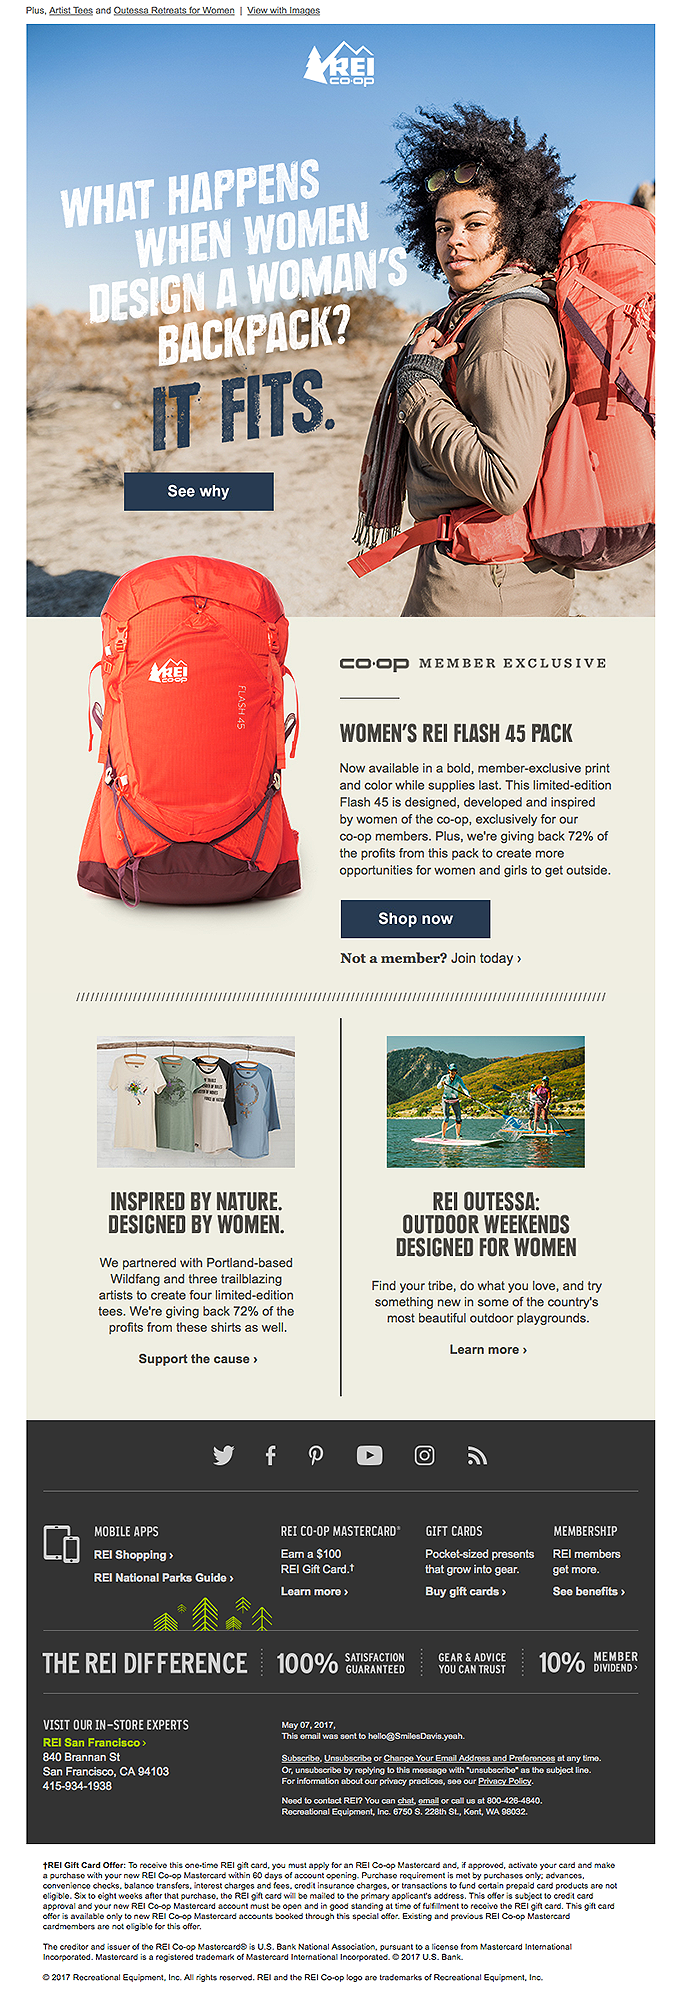 Member Exclusive: Limited Edition REI Flash 45 Pack for Women